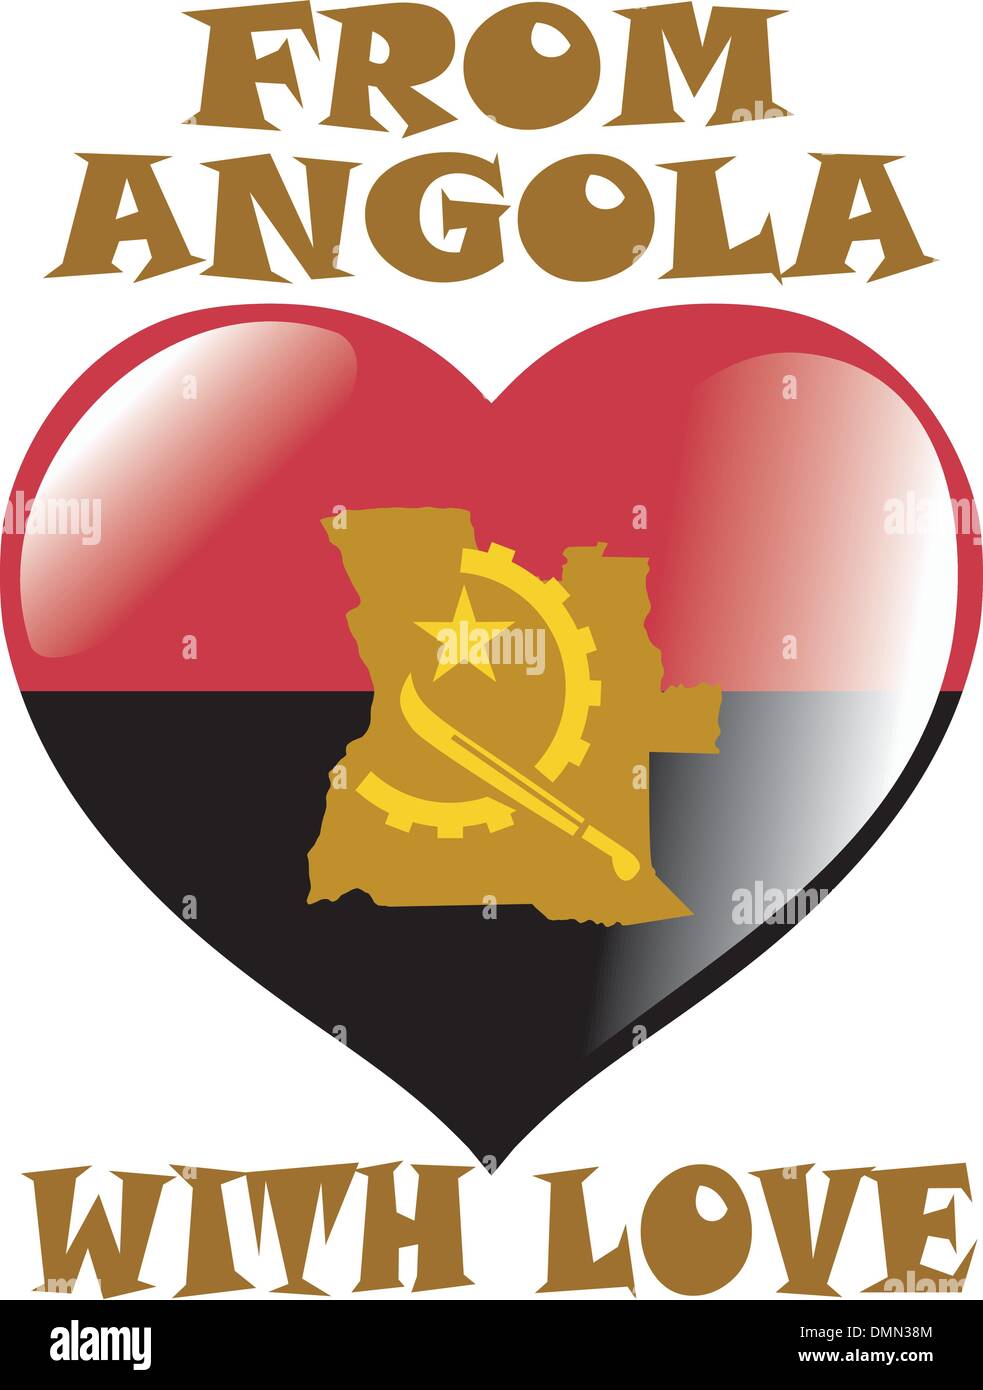 from Angola with love Stock Vector